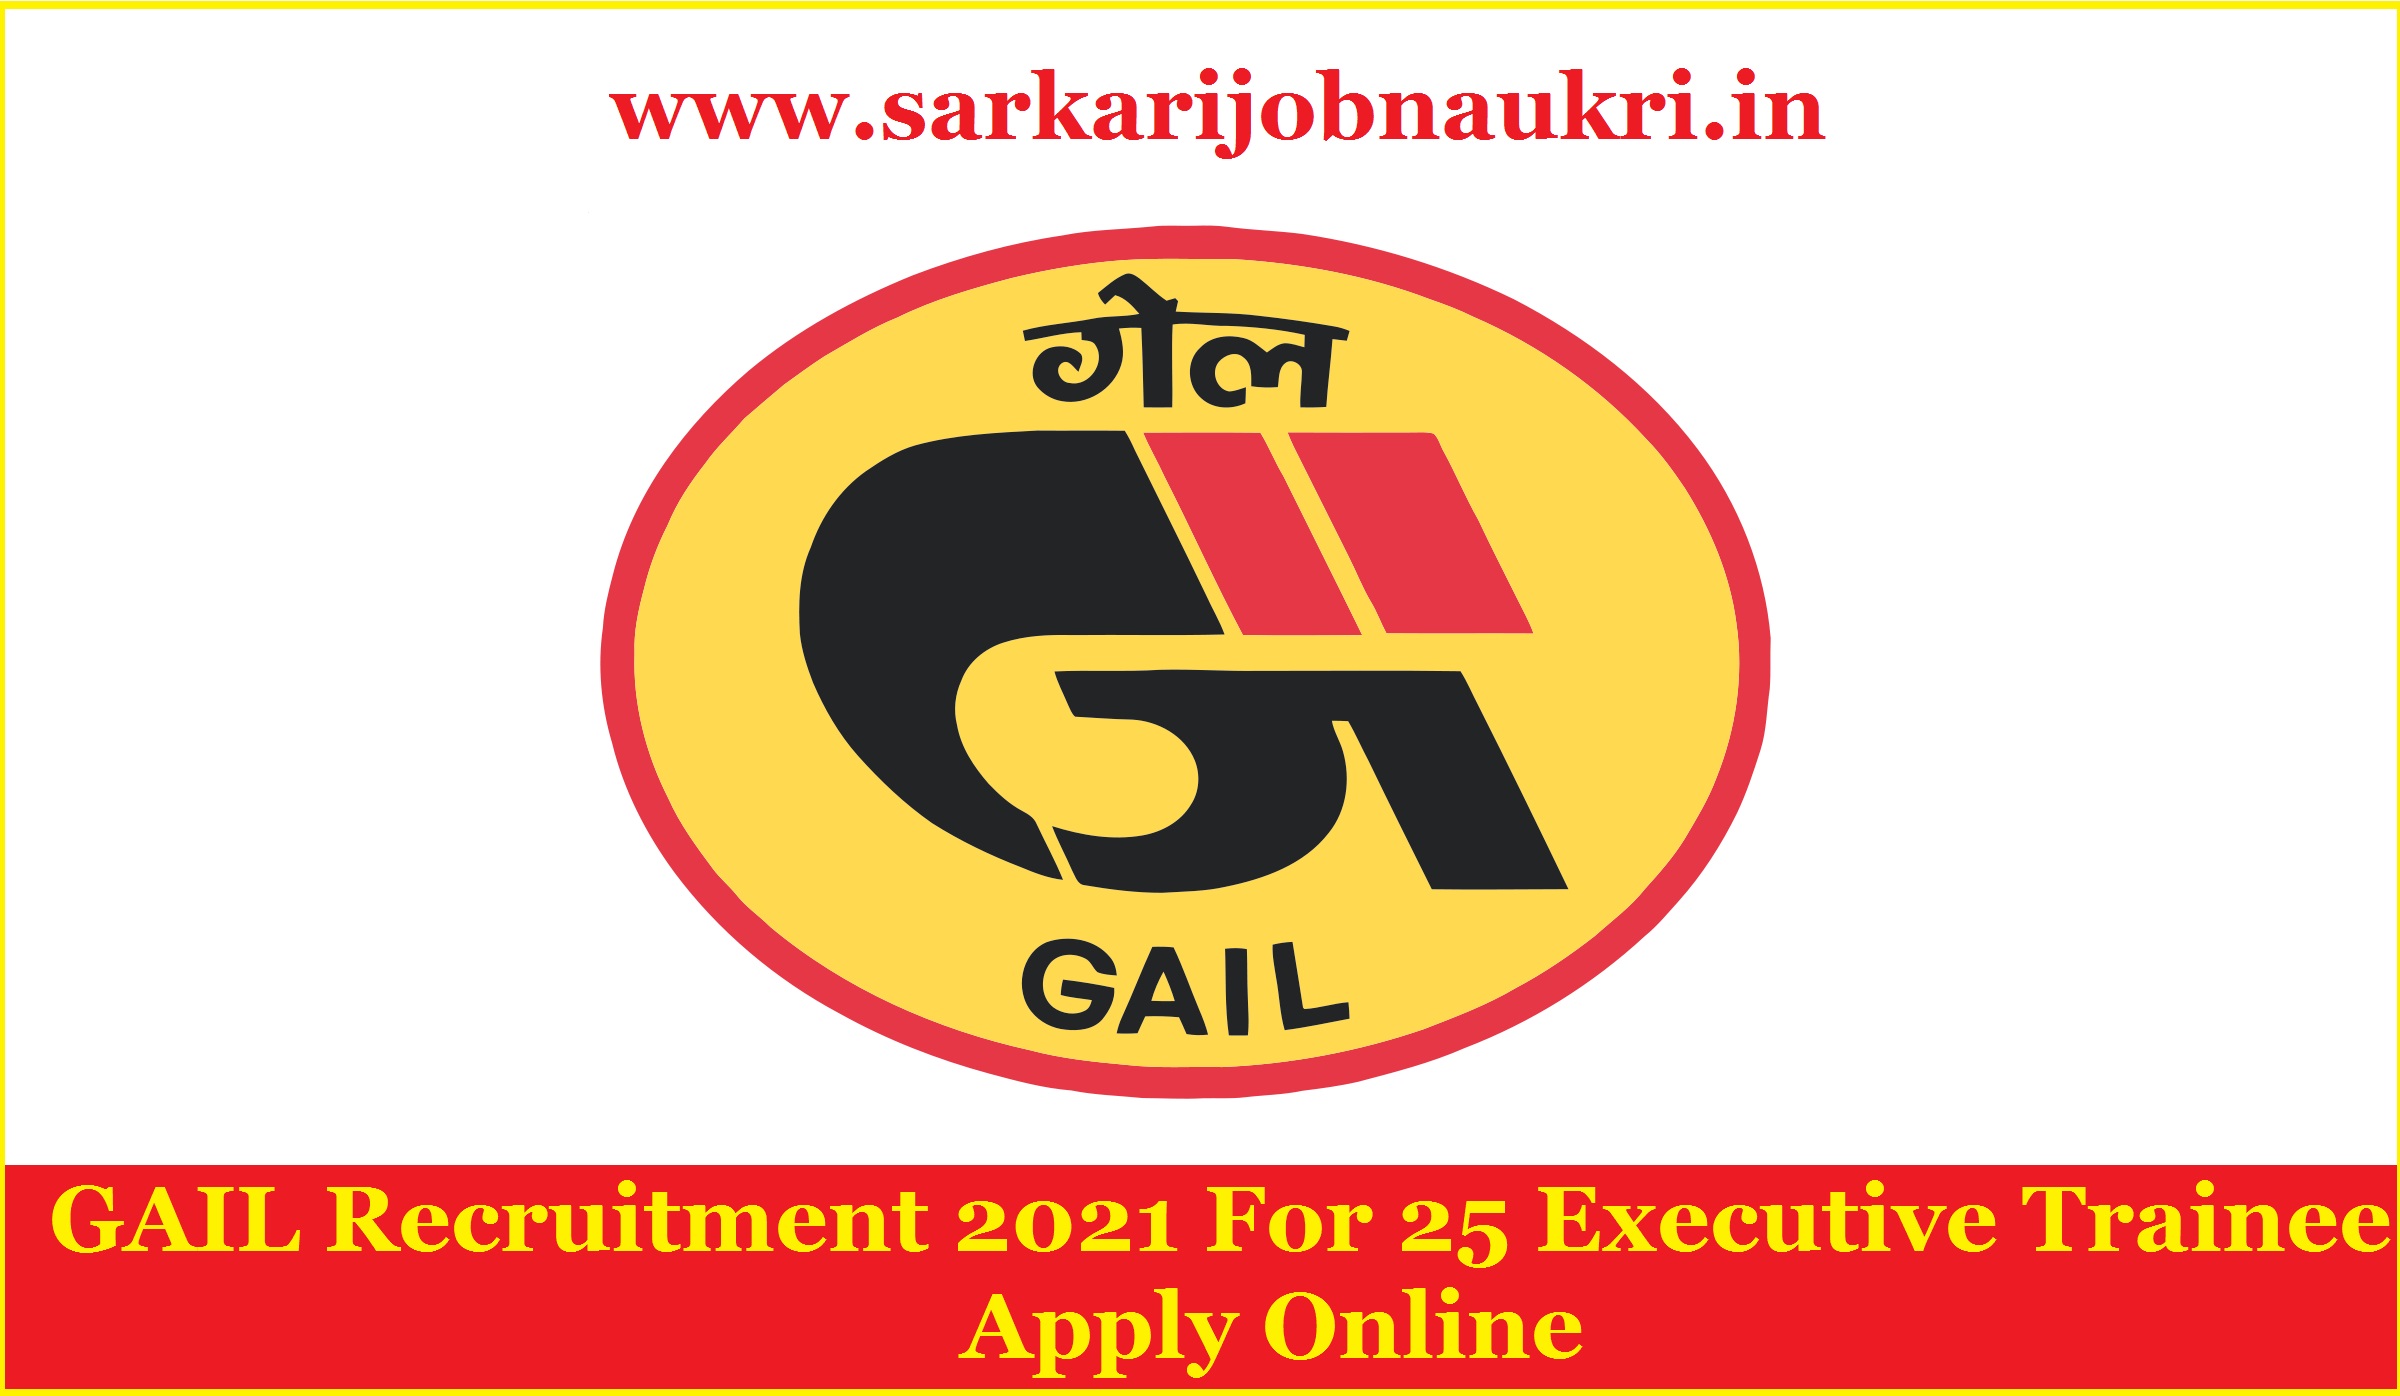 GAIL Recruitment 2021 For 25 Executive Trainee Apply Online